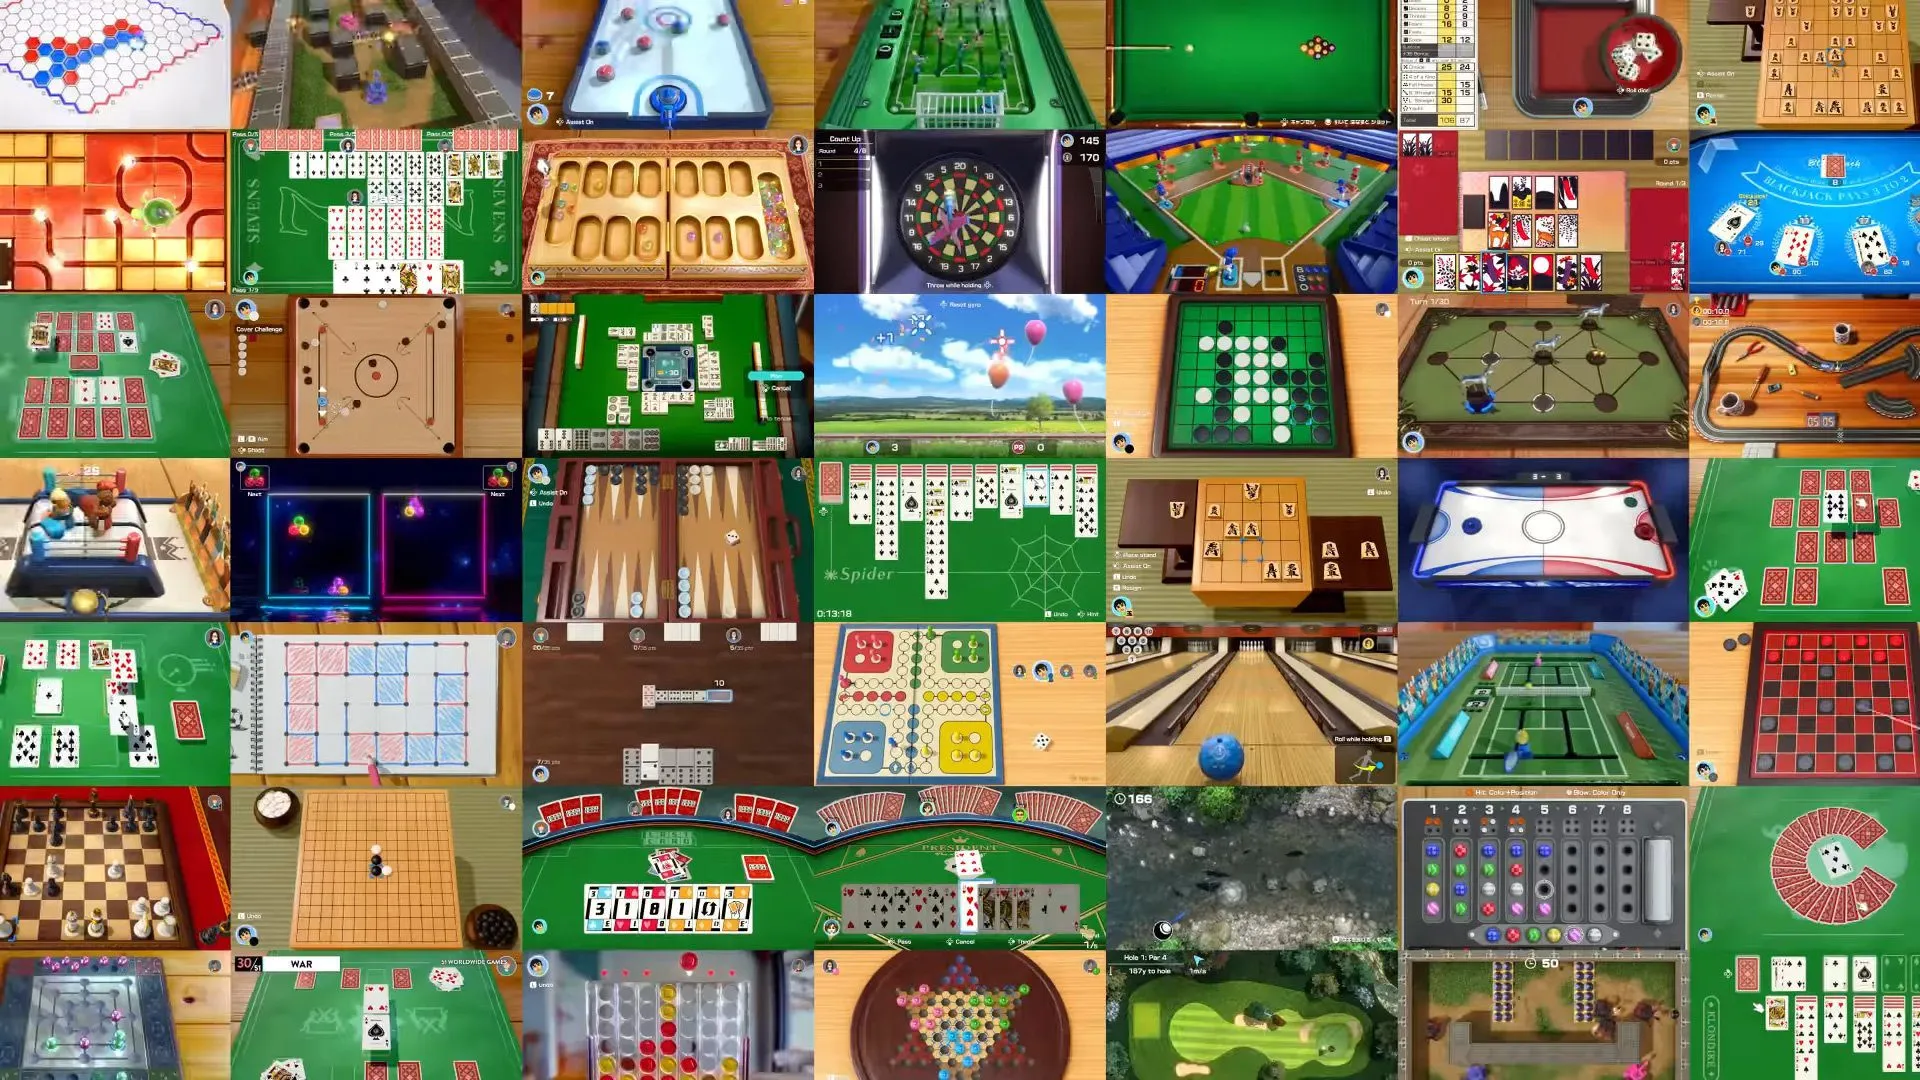 What Are the Multiplayer Options in Clubhouse Games on Switch? - Feature -  Nintendo World Report